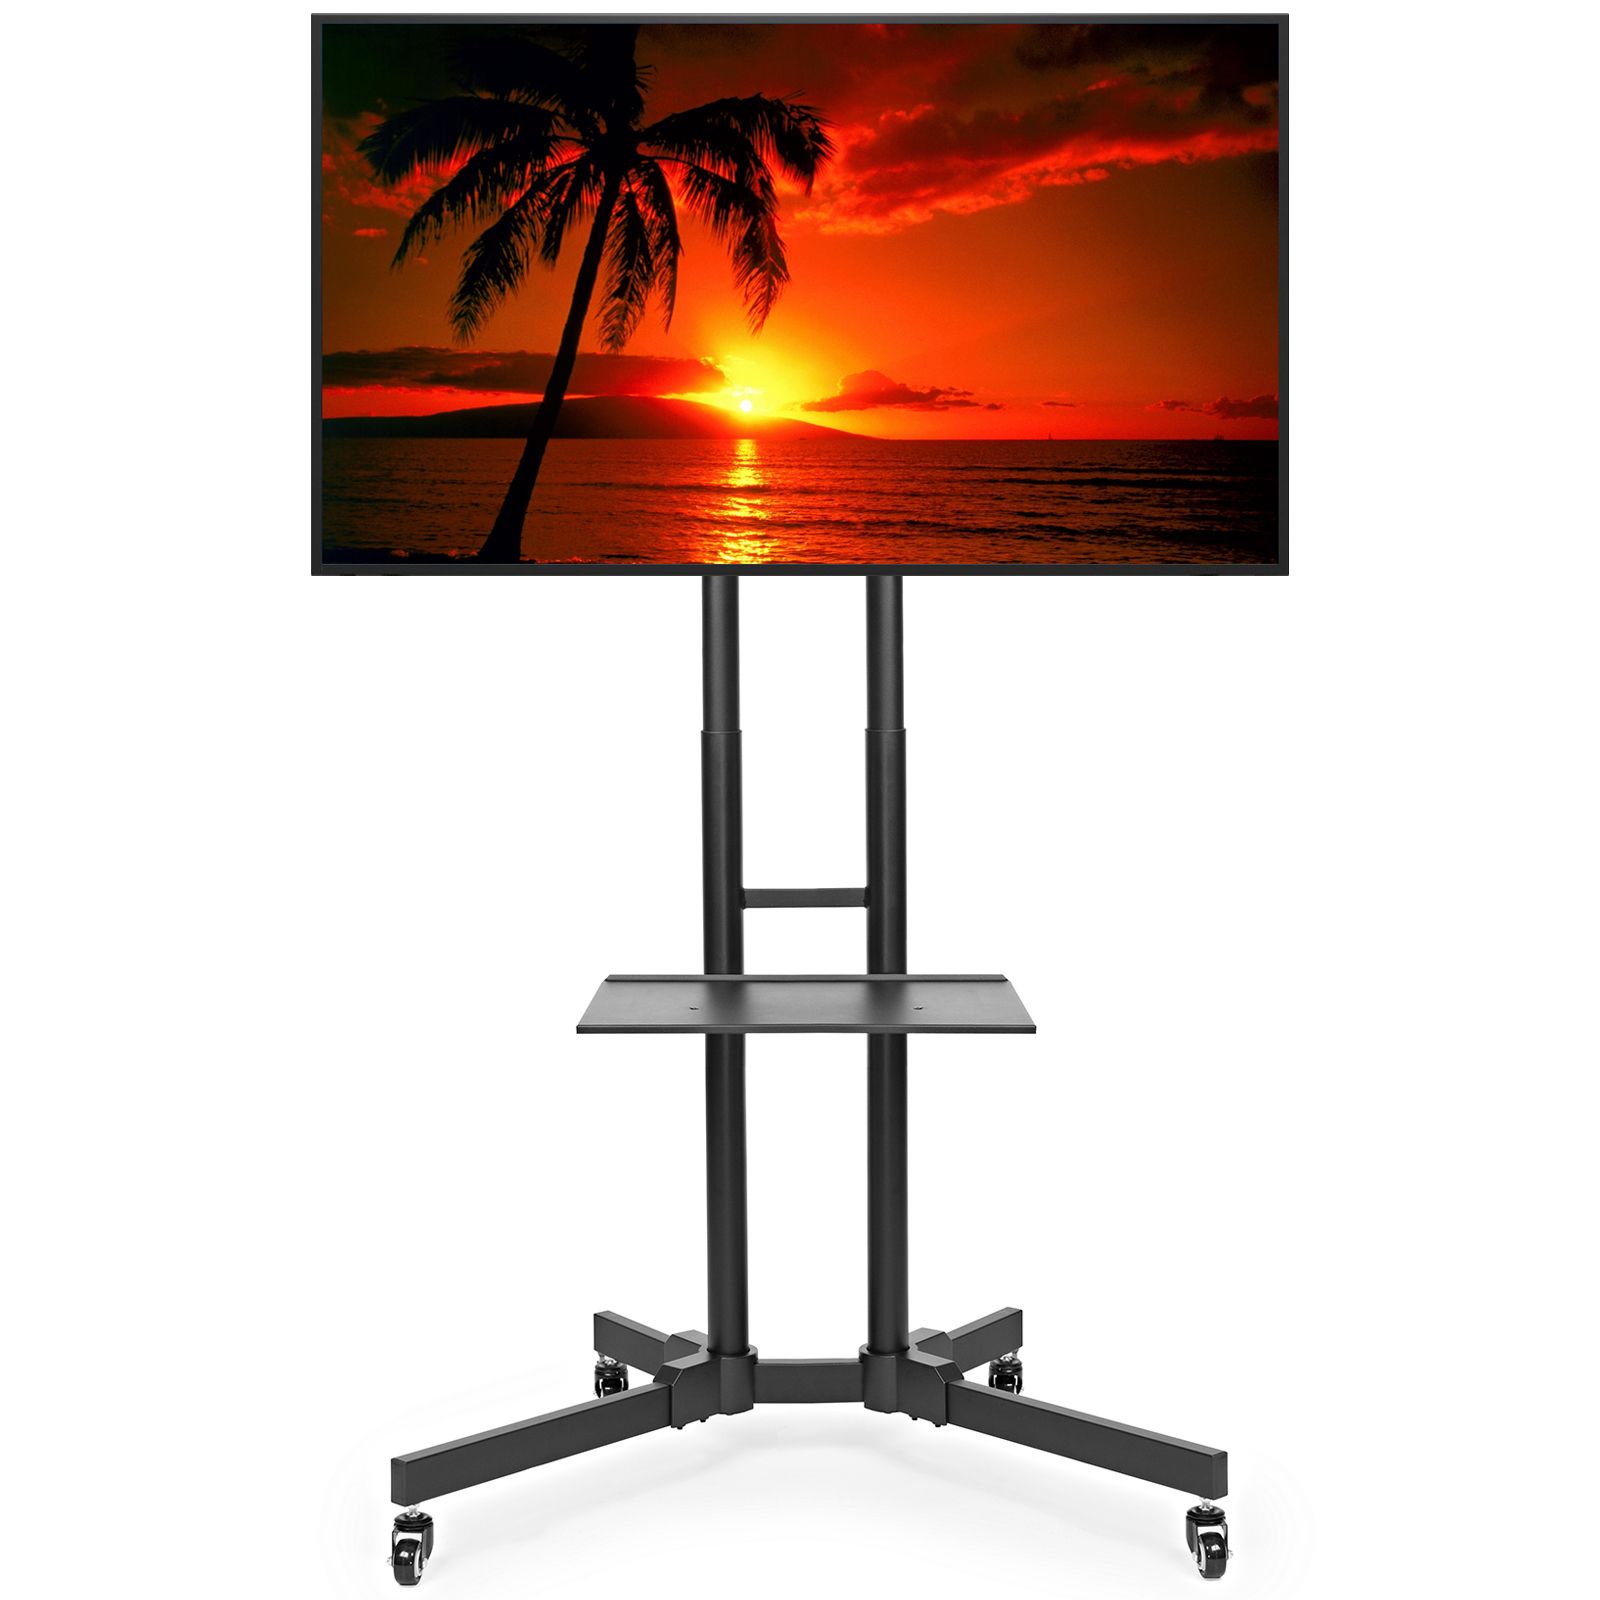 Fashionable Easyfashion Adjustable Rolling Tv Stands For Flat Panel Tvs With Regard To Rolling Tv Stand Cart Mount For Oled, Led, Flat Screen (View 5 of 10)